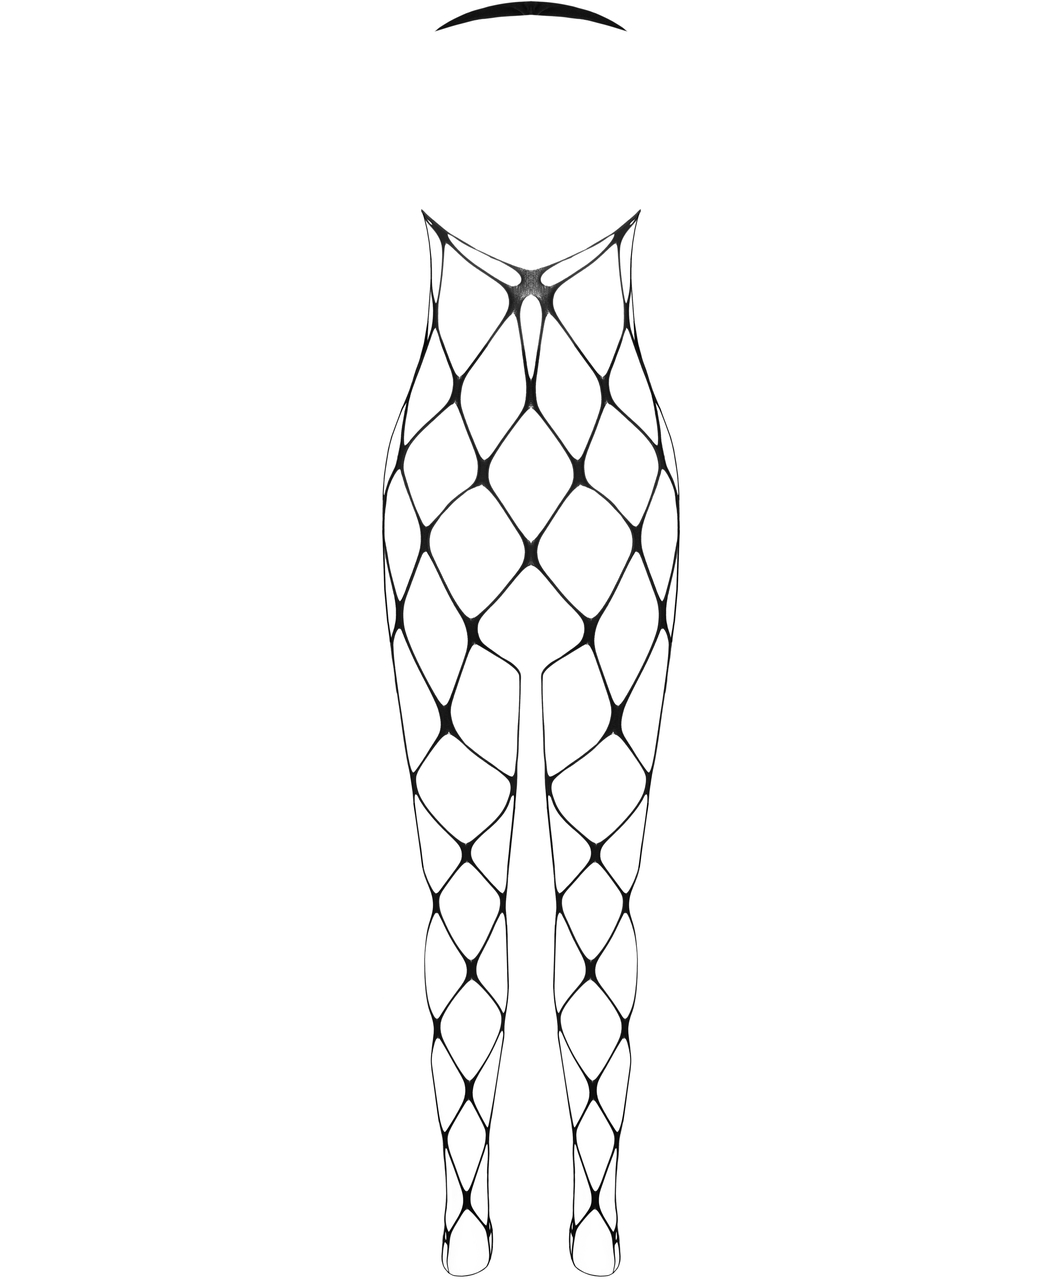 Passion BS091 net crotchless bodystocking